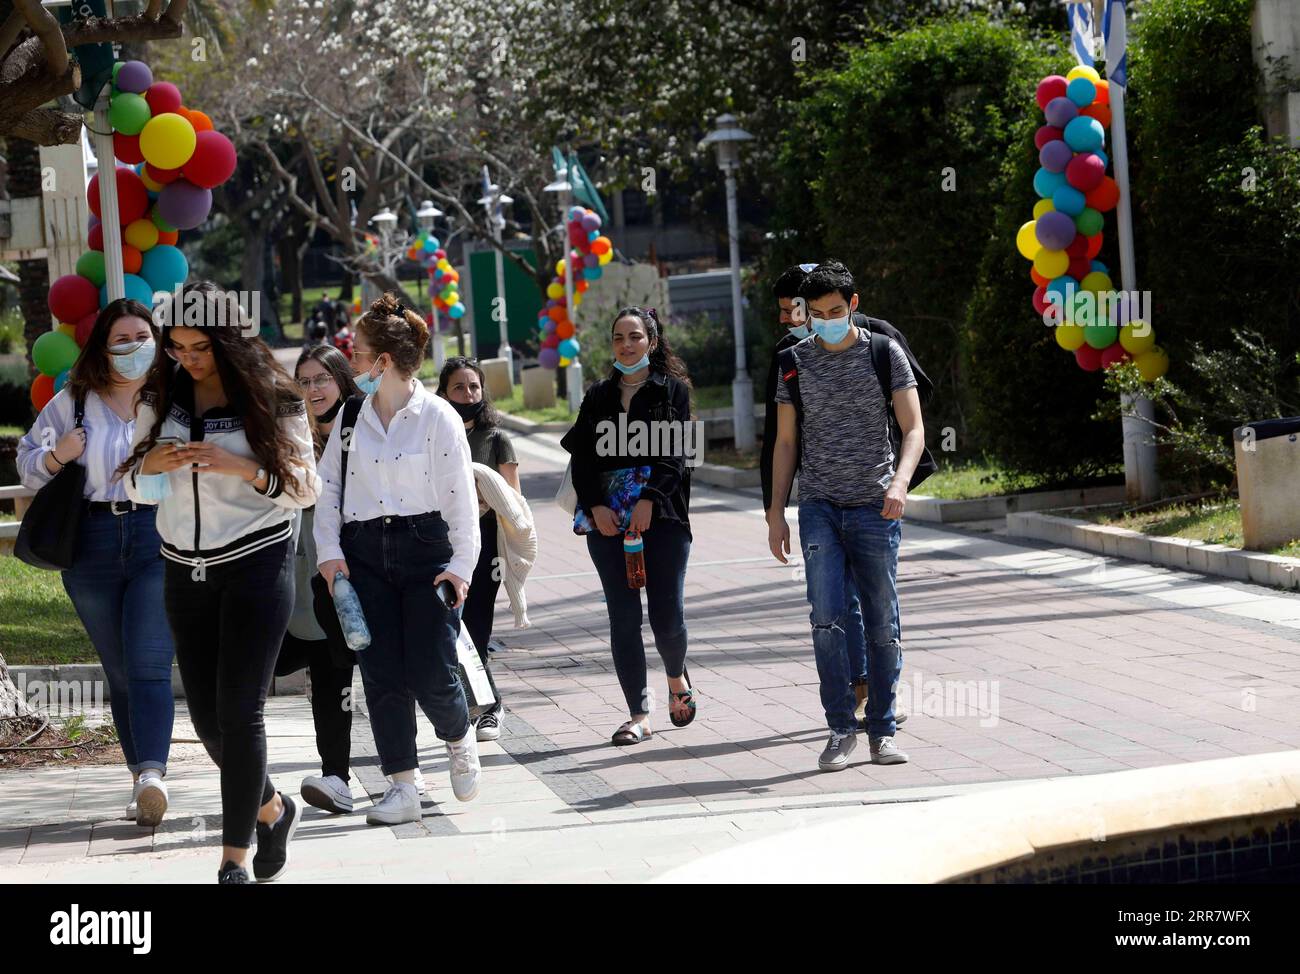 210405 -- RAMAT GAN, April 5, 2021 -- Students walk in the campus at Bar Ilan University at central Israeli city of Ramat Gan on April 5, 2021. Israel s Ministry of Health reported 353 new COVID-19 cases on Monday, raising the total infections in the country to 834,563. The number of patients in serious conditions decreased from 344 to 323, out of the 489 hospitalized patients. This is the lowest number of patients in serious conditions in Israel since Dec. 10, 2020 when it stood at 320. Photo by /Xinhua ISRAEL-RAMAT GAN-COVID-19-CASES GilxCohenxMagen PUBLICATIONxNOTxINxCHN Stock Photo